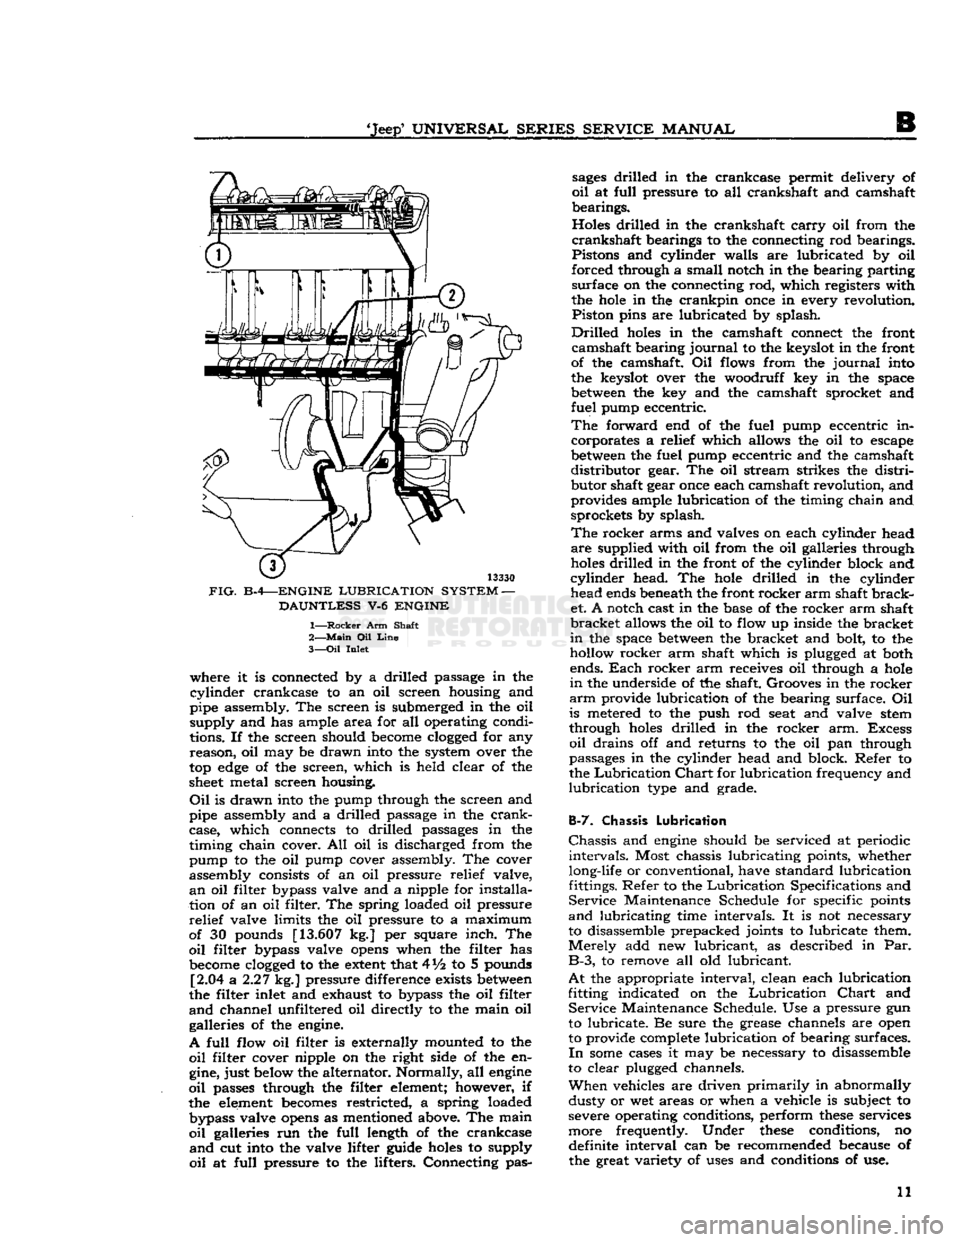 JEEP CJ 1953 User Guide 
Jeep*
 UNIVERSAL
 SERIES
 SERVICE
 MANUAL 

13330 

FIG.
 B-4—ENGINE
 LUBRICATION
 SYSTEM
 — 
 DAUNTLESS
 V-6
 ENGINE 

1—
 Rocker
 Arm Shaft 
2—
 Main
 Oil
 Line 

3—
 Oil
 Inlet  where i